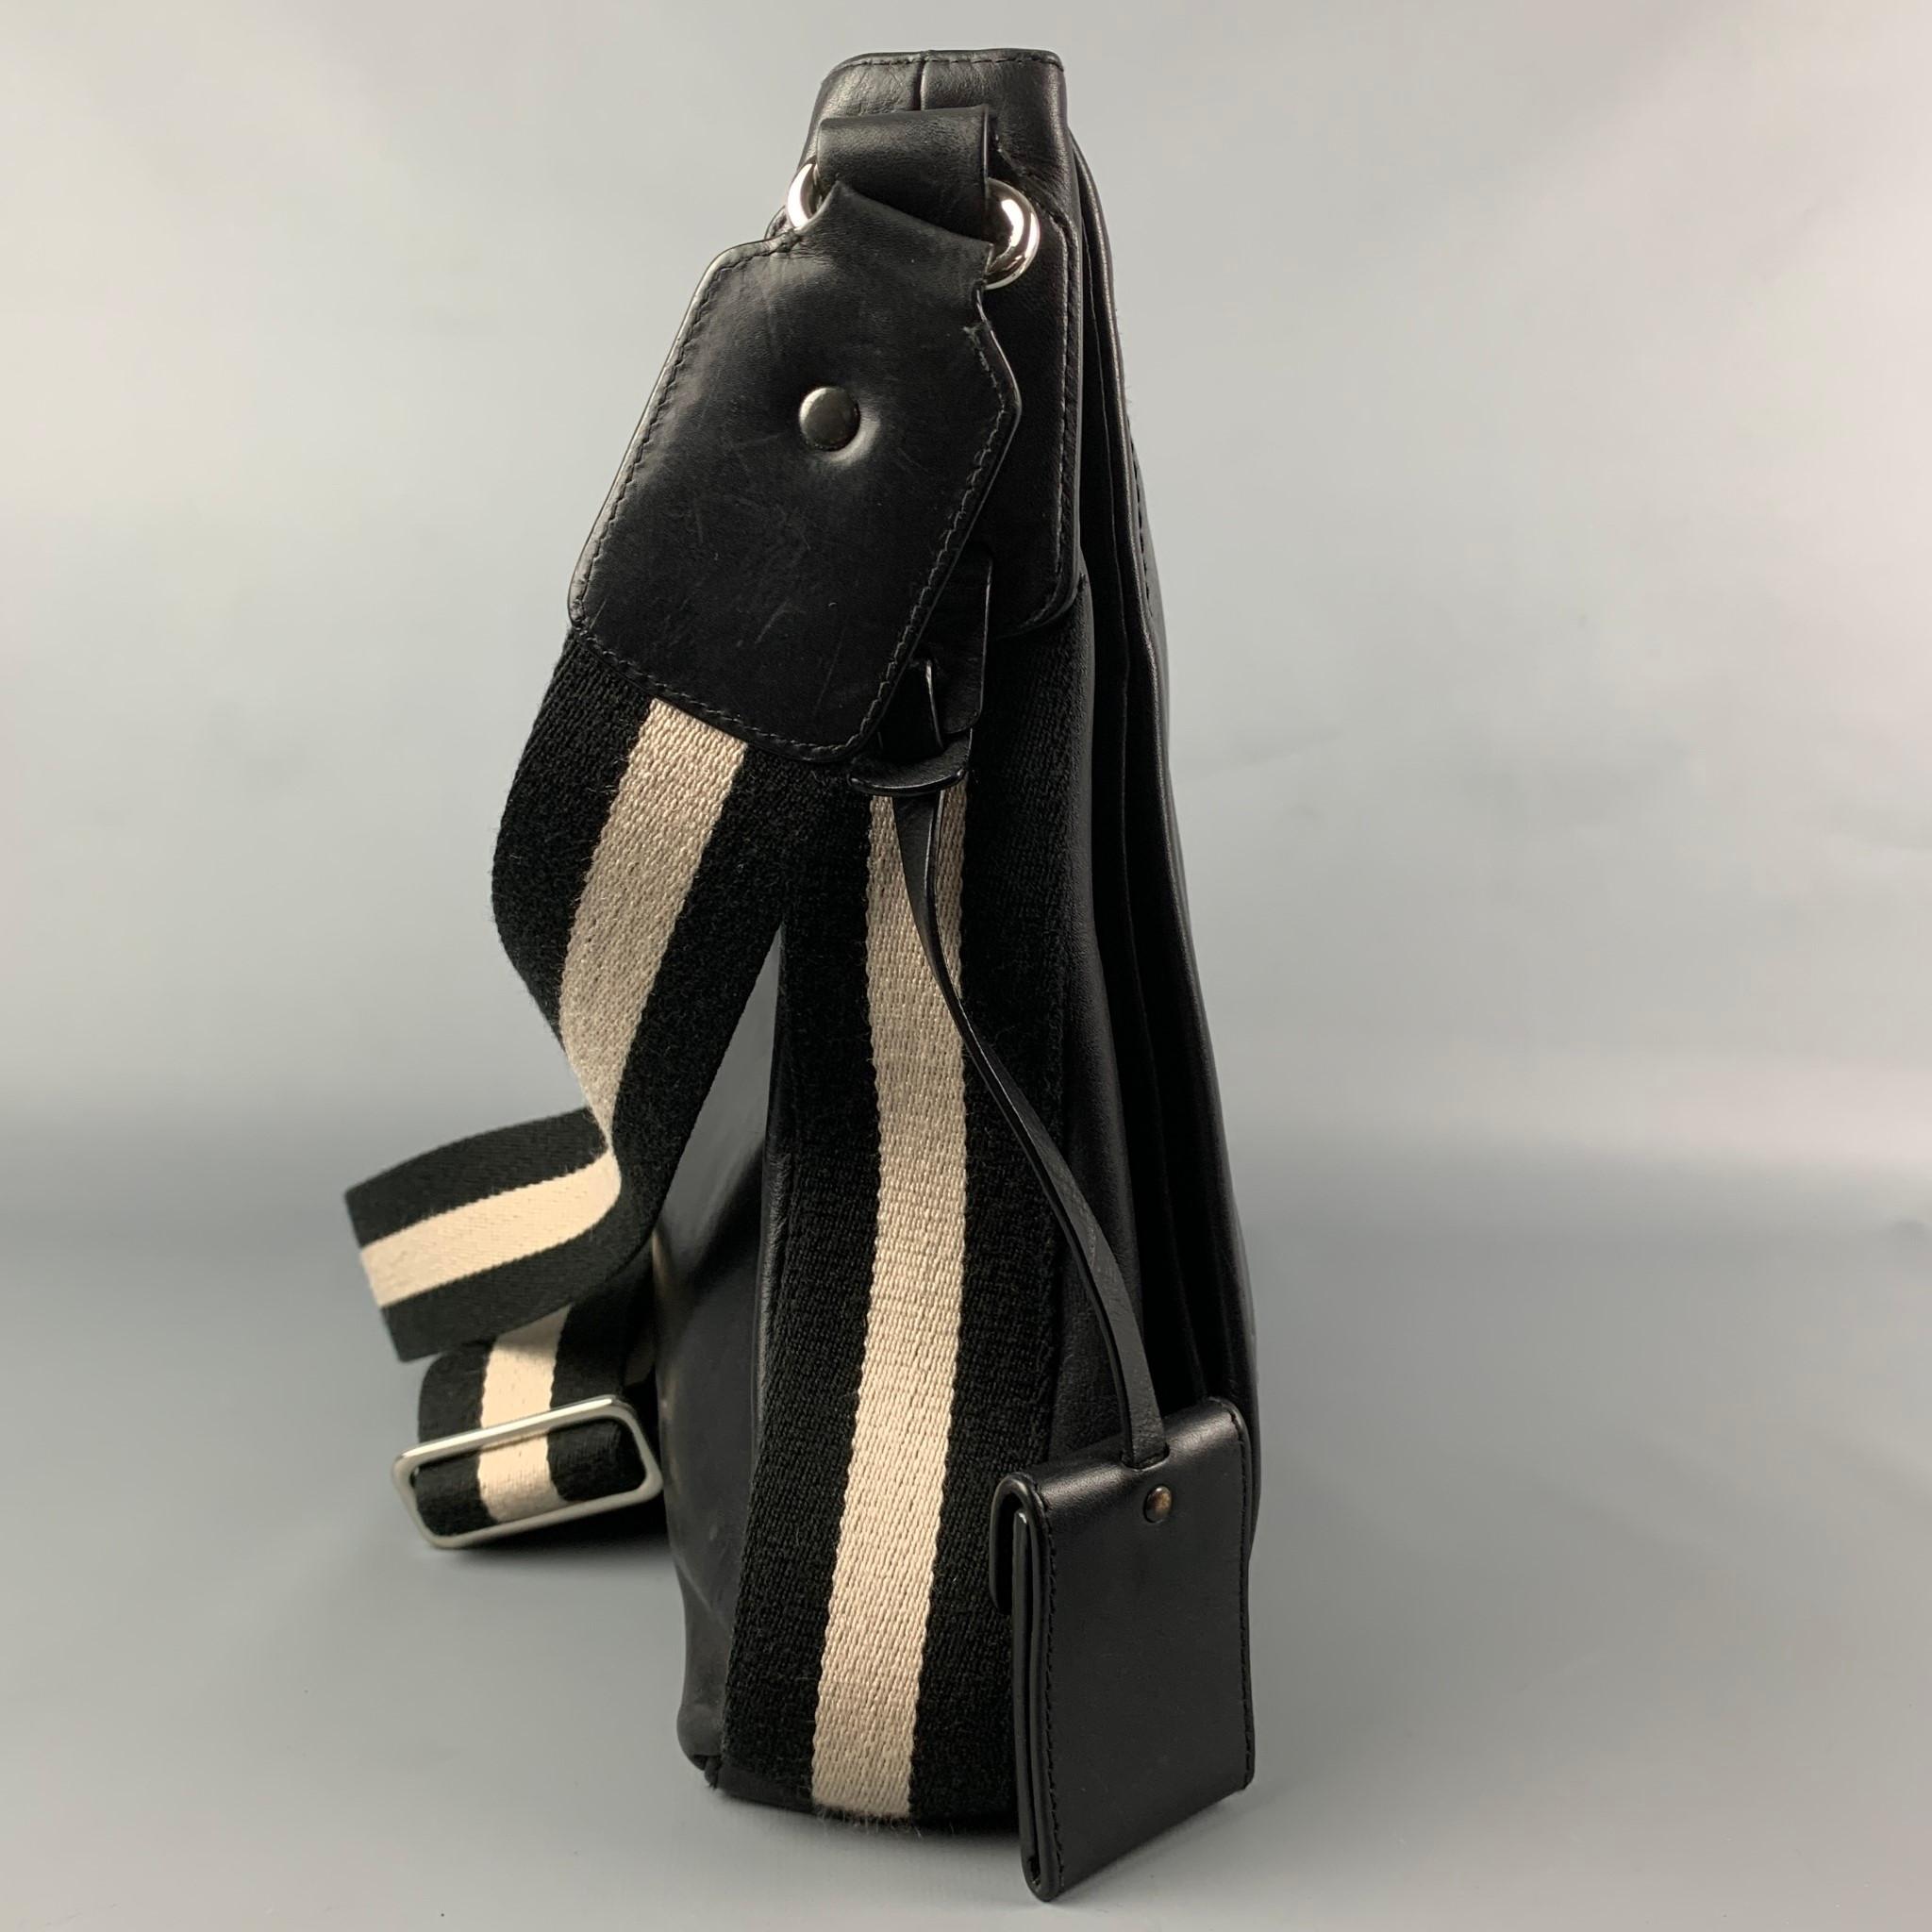 BALLY bag comes in a black leather featuring a messenger style, stripe trim, shoulder strap, silver tone hardware, front flap design, and inner pockets. 

Good Pre-Owned Condition.

Measurements:

Length: 12 in.
Width: 2.25 in.
Height: 12 in.
Drop: